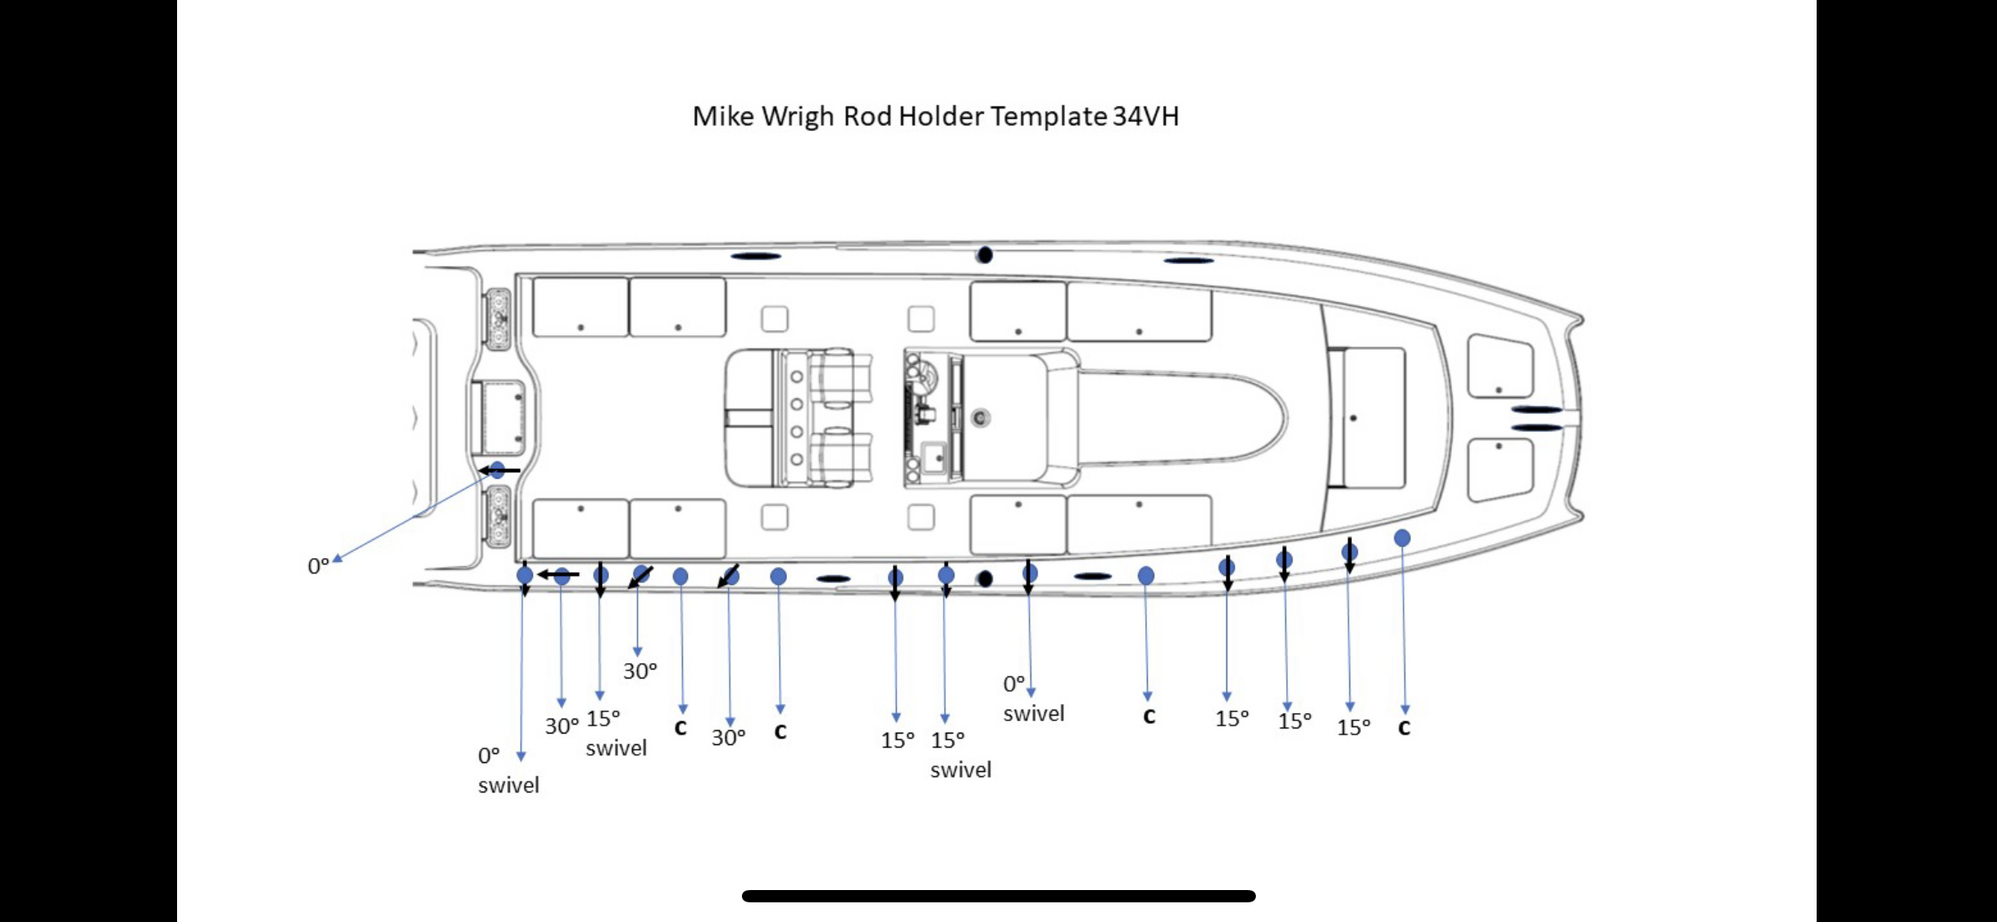 Freeman rod holder layout - The Hull Truth - Boating and Fishing Forum